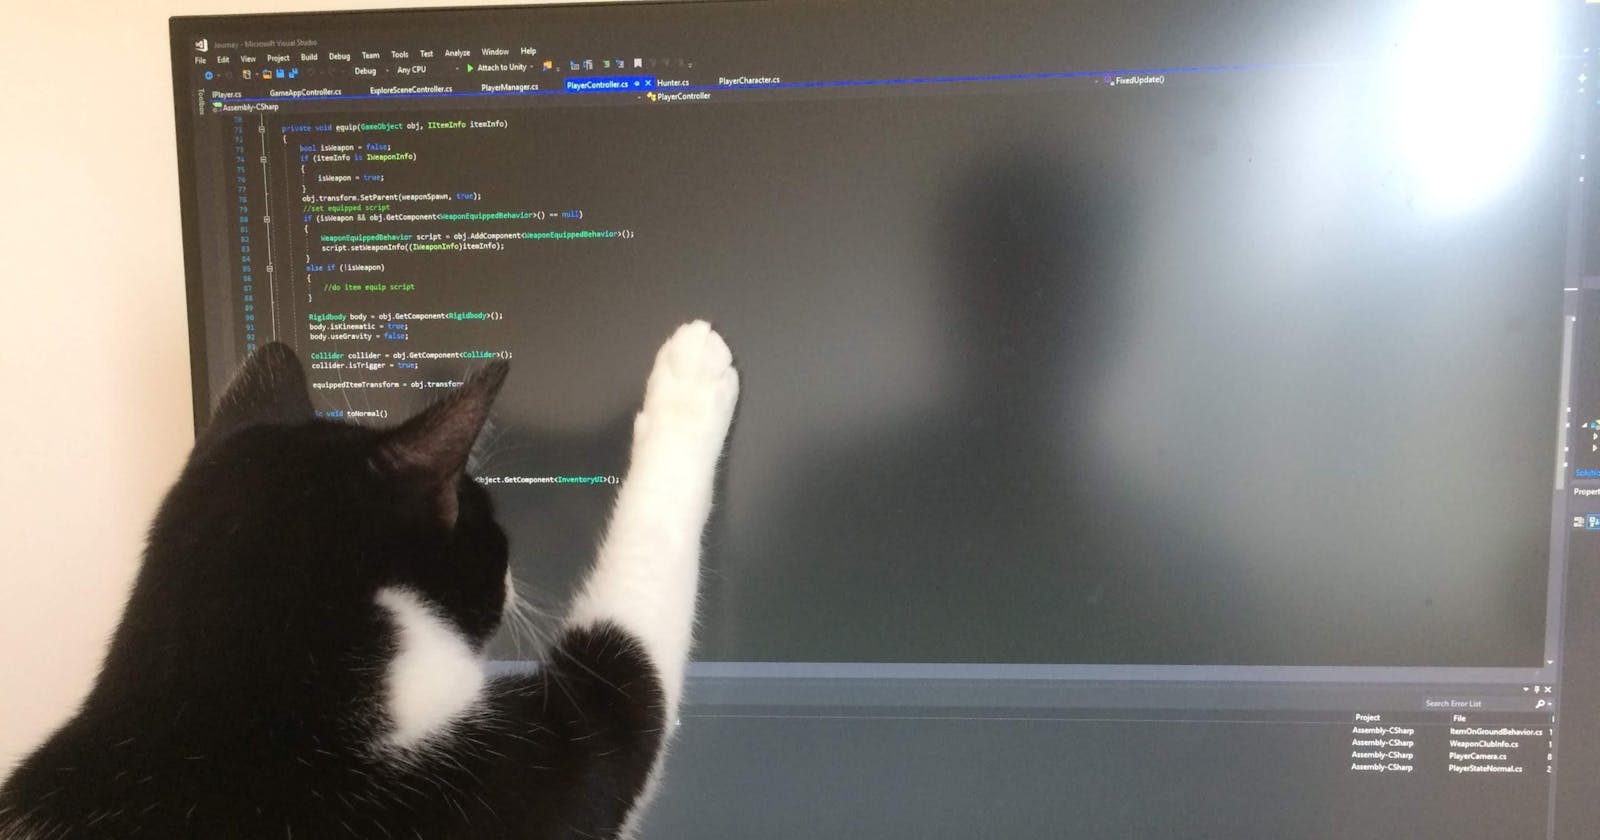 Journey to become a tech lead | "It's your life" and "The cat ate my source code"